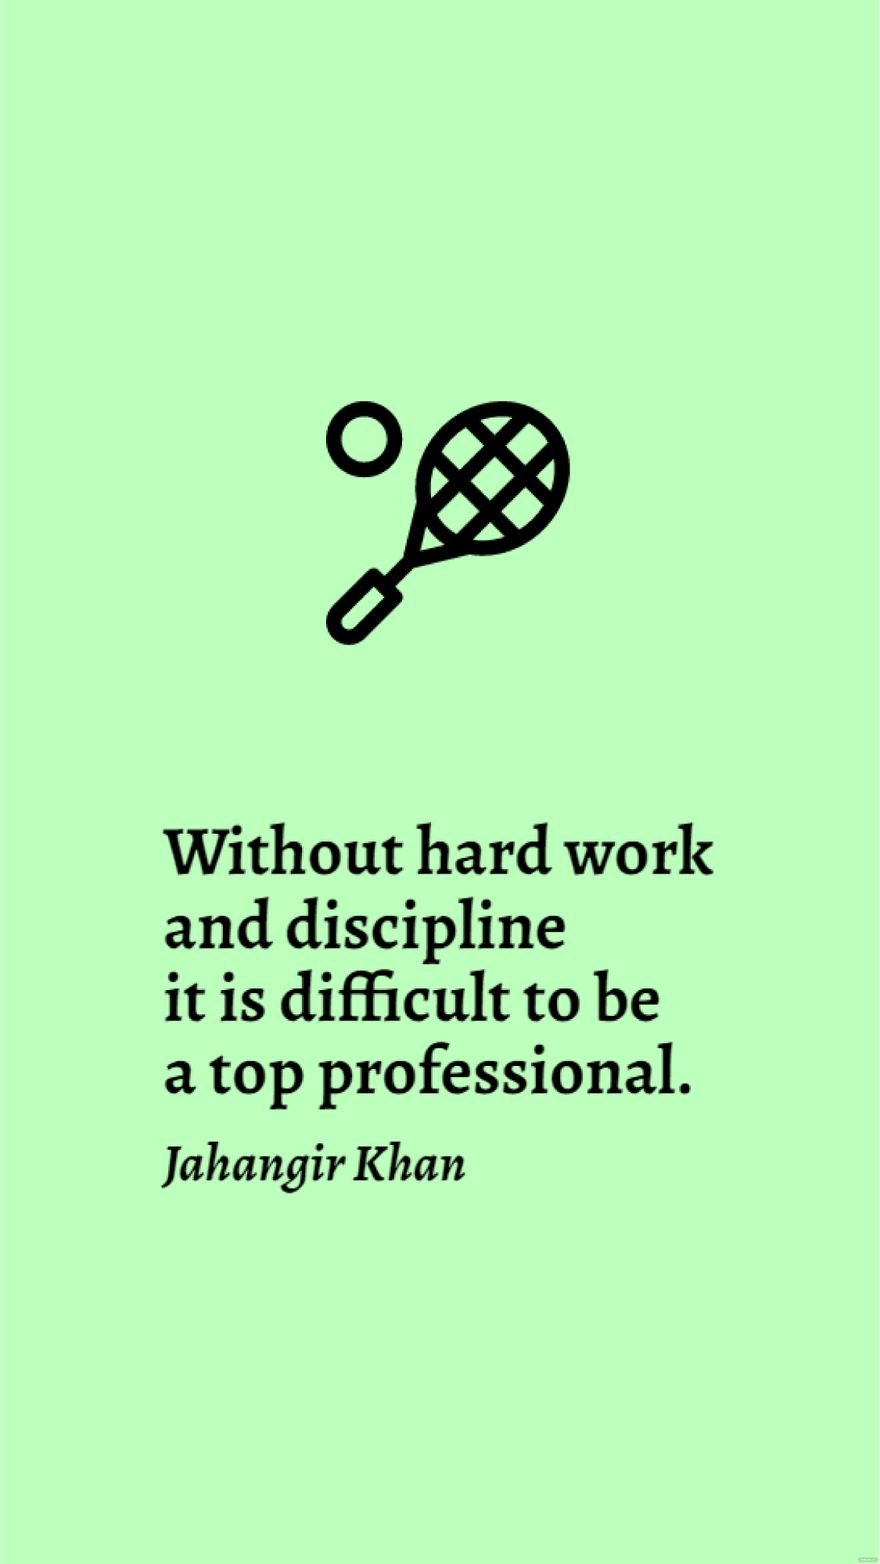 Jahangir Khan - Without hard work and discipline it is difficult to be a top professional. in JPG